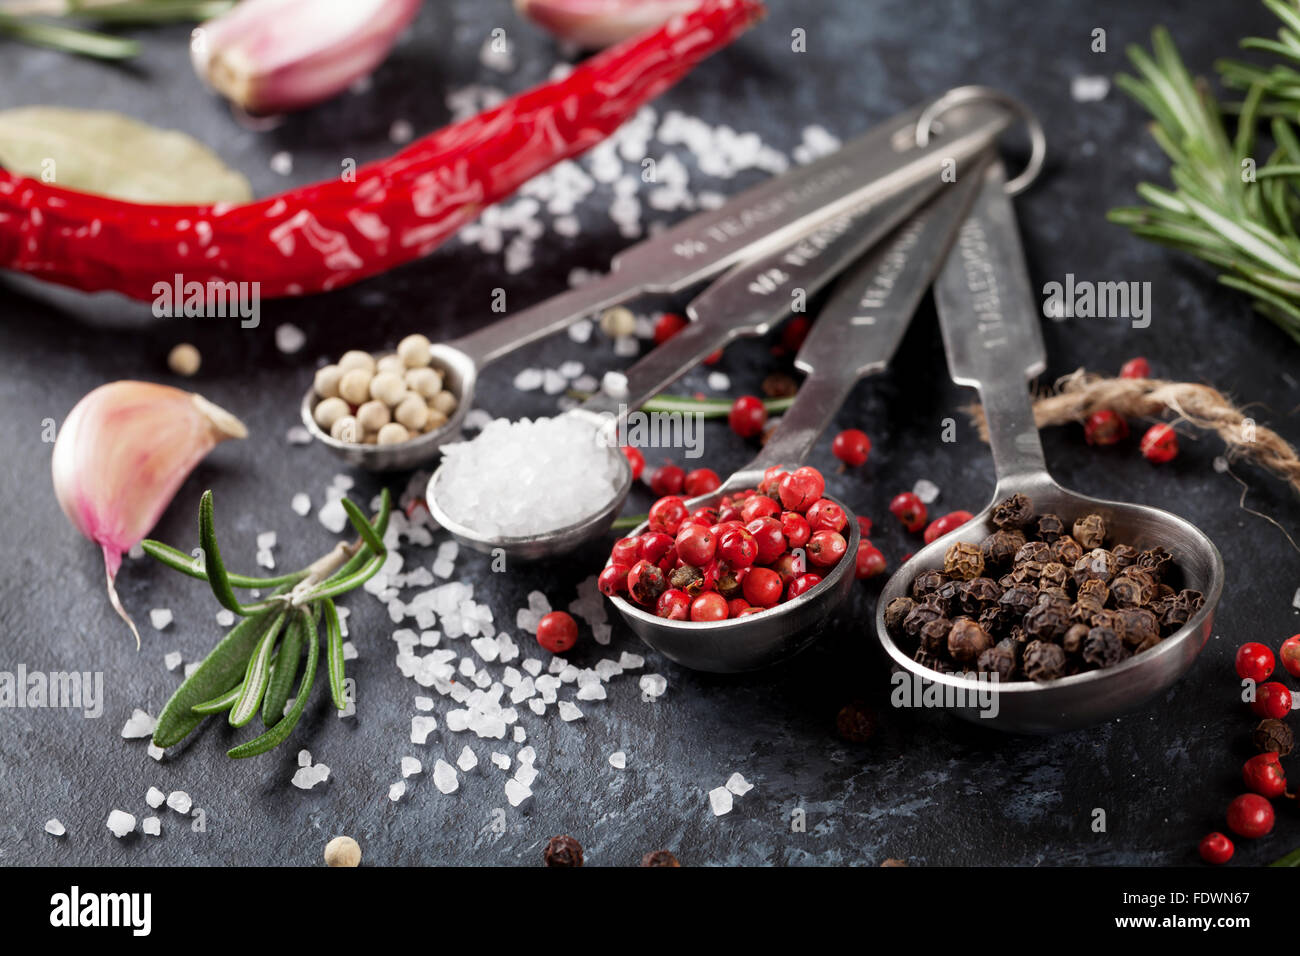 Herbs and spices over black stone background Stock Photo